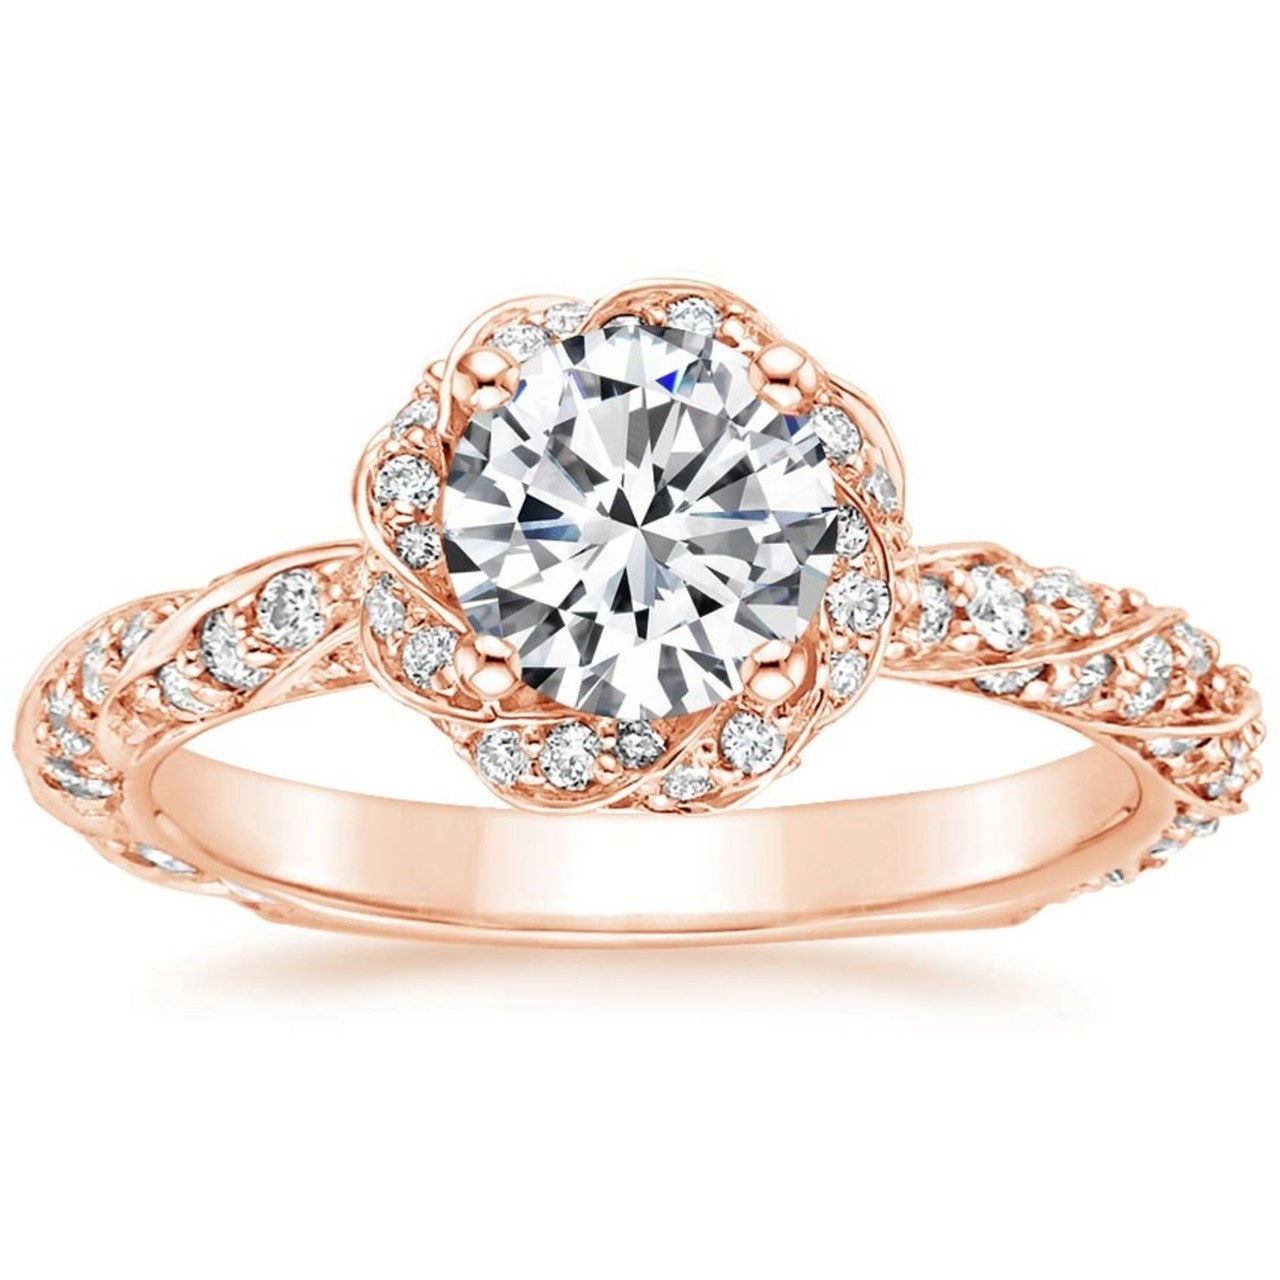 2 best new engagement rings 1229 courtesy brilliant earth